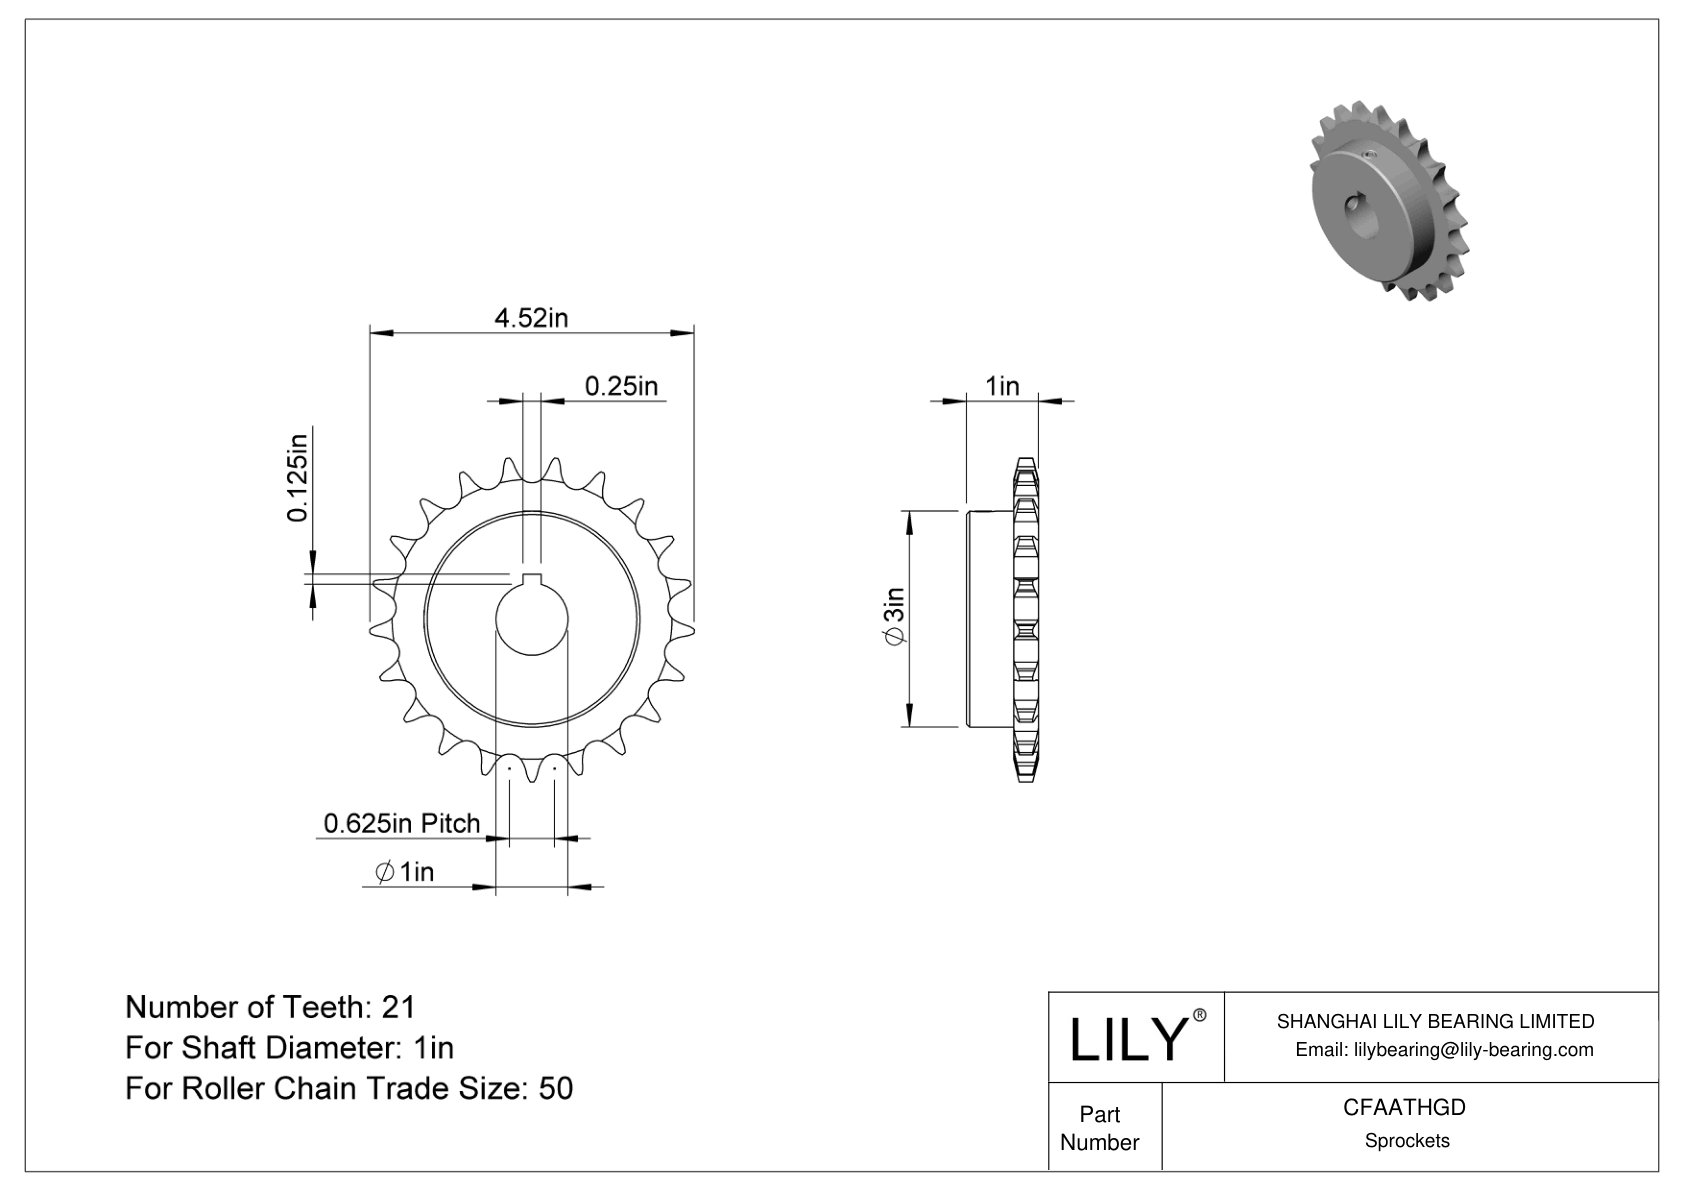 CFAATHGD Wear-Resistant Sprockets for ANSI Roller Chain cad drawing